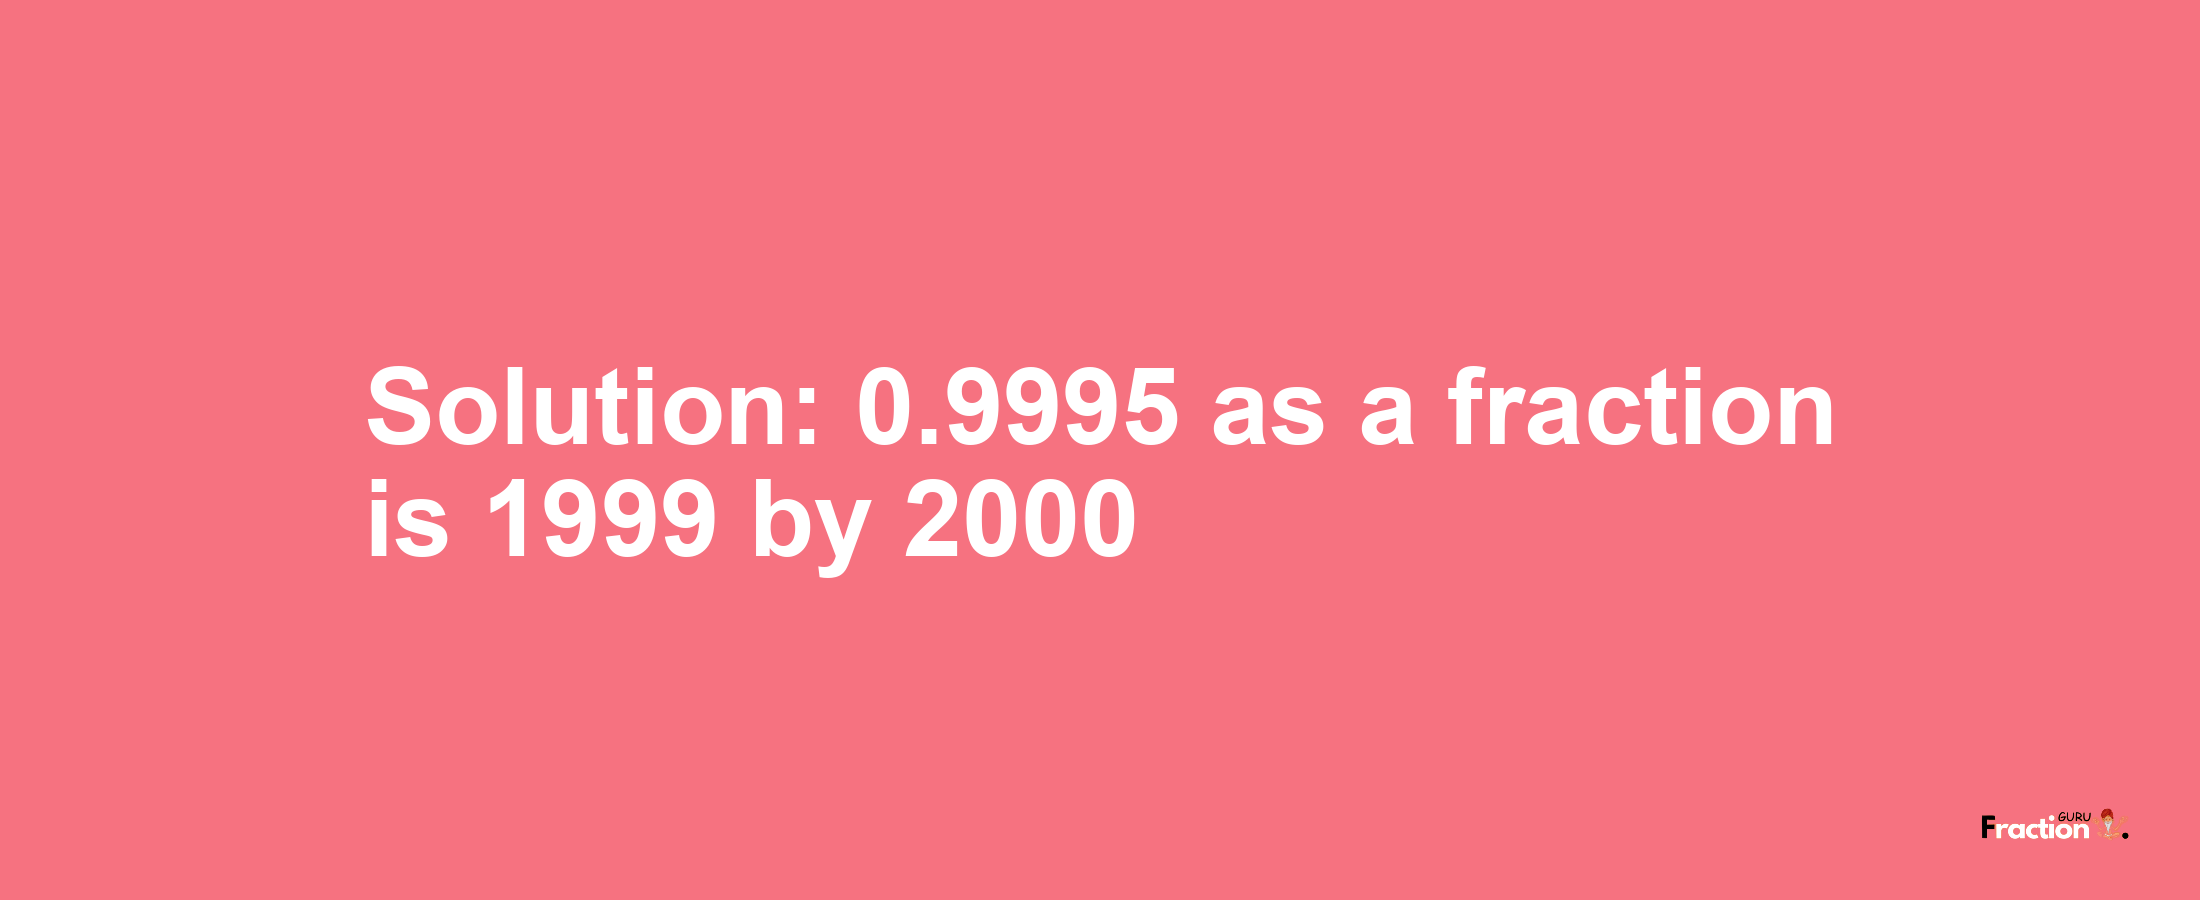 Solution:0.9995 as a fraction is 1999/2000